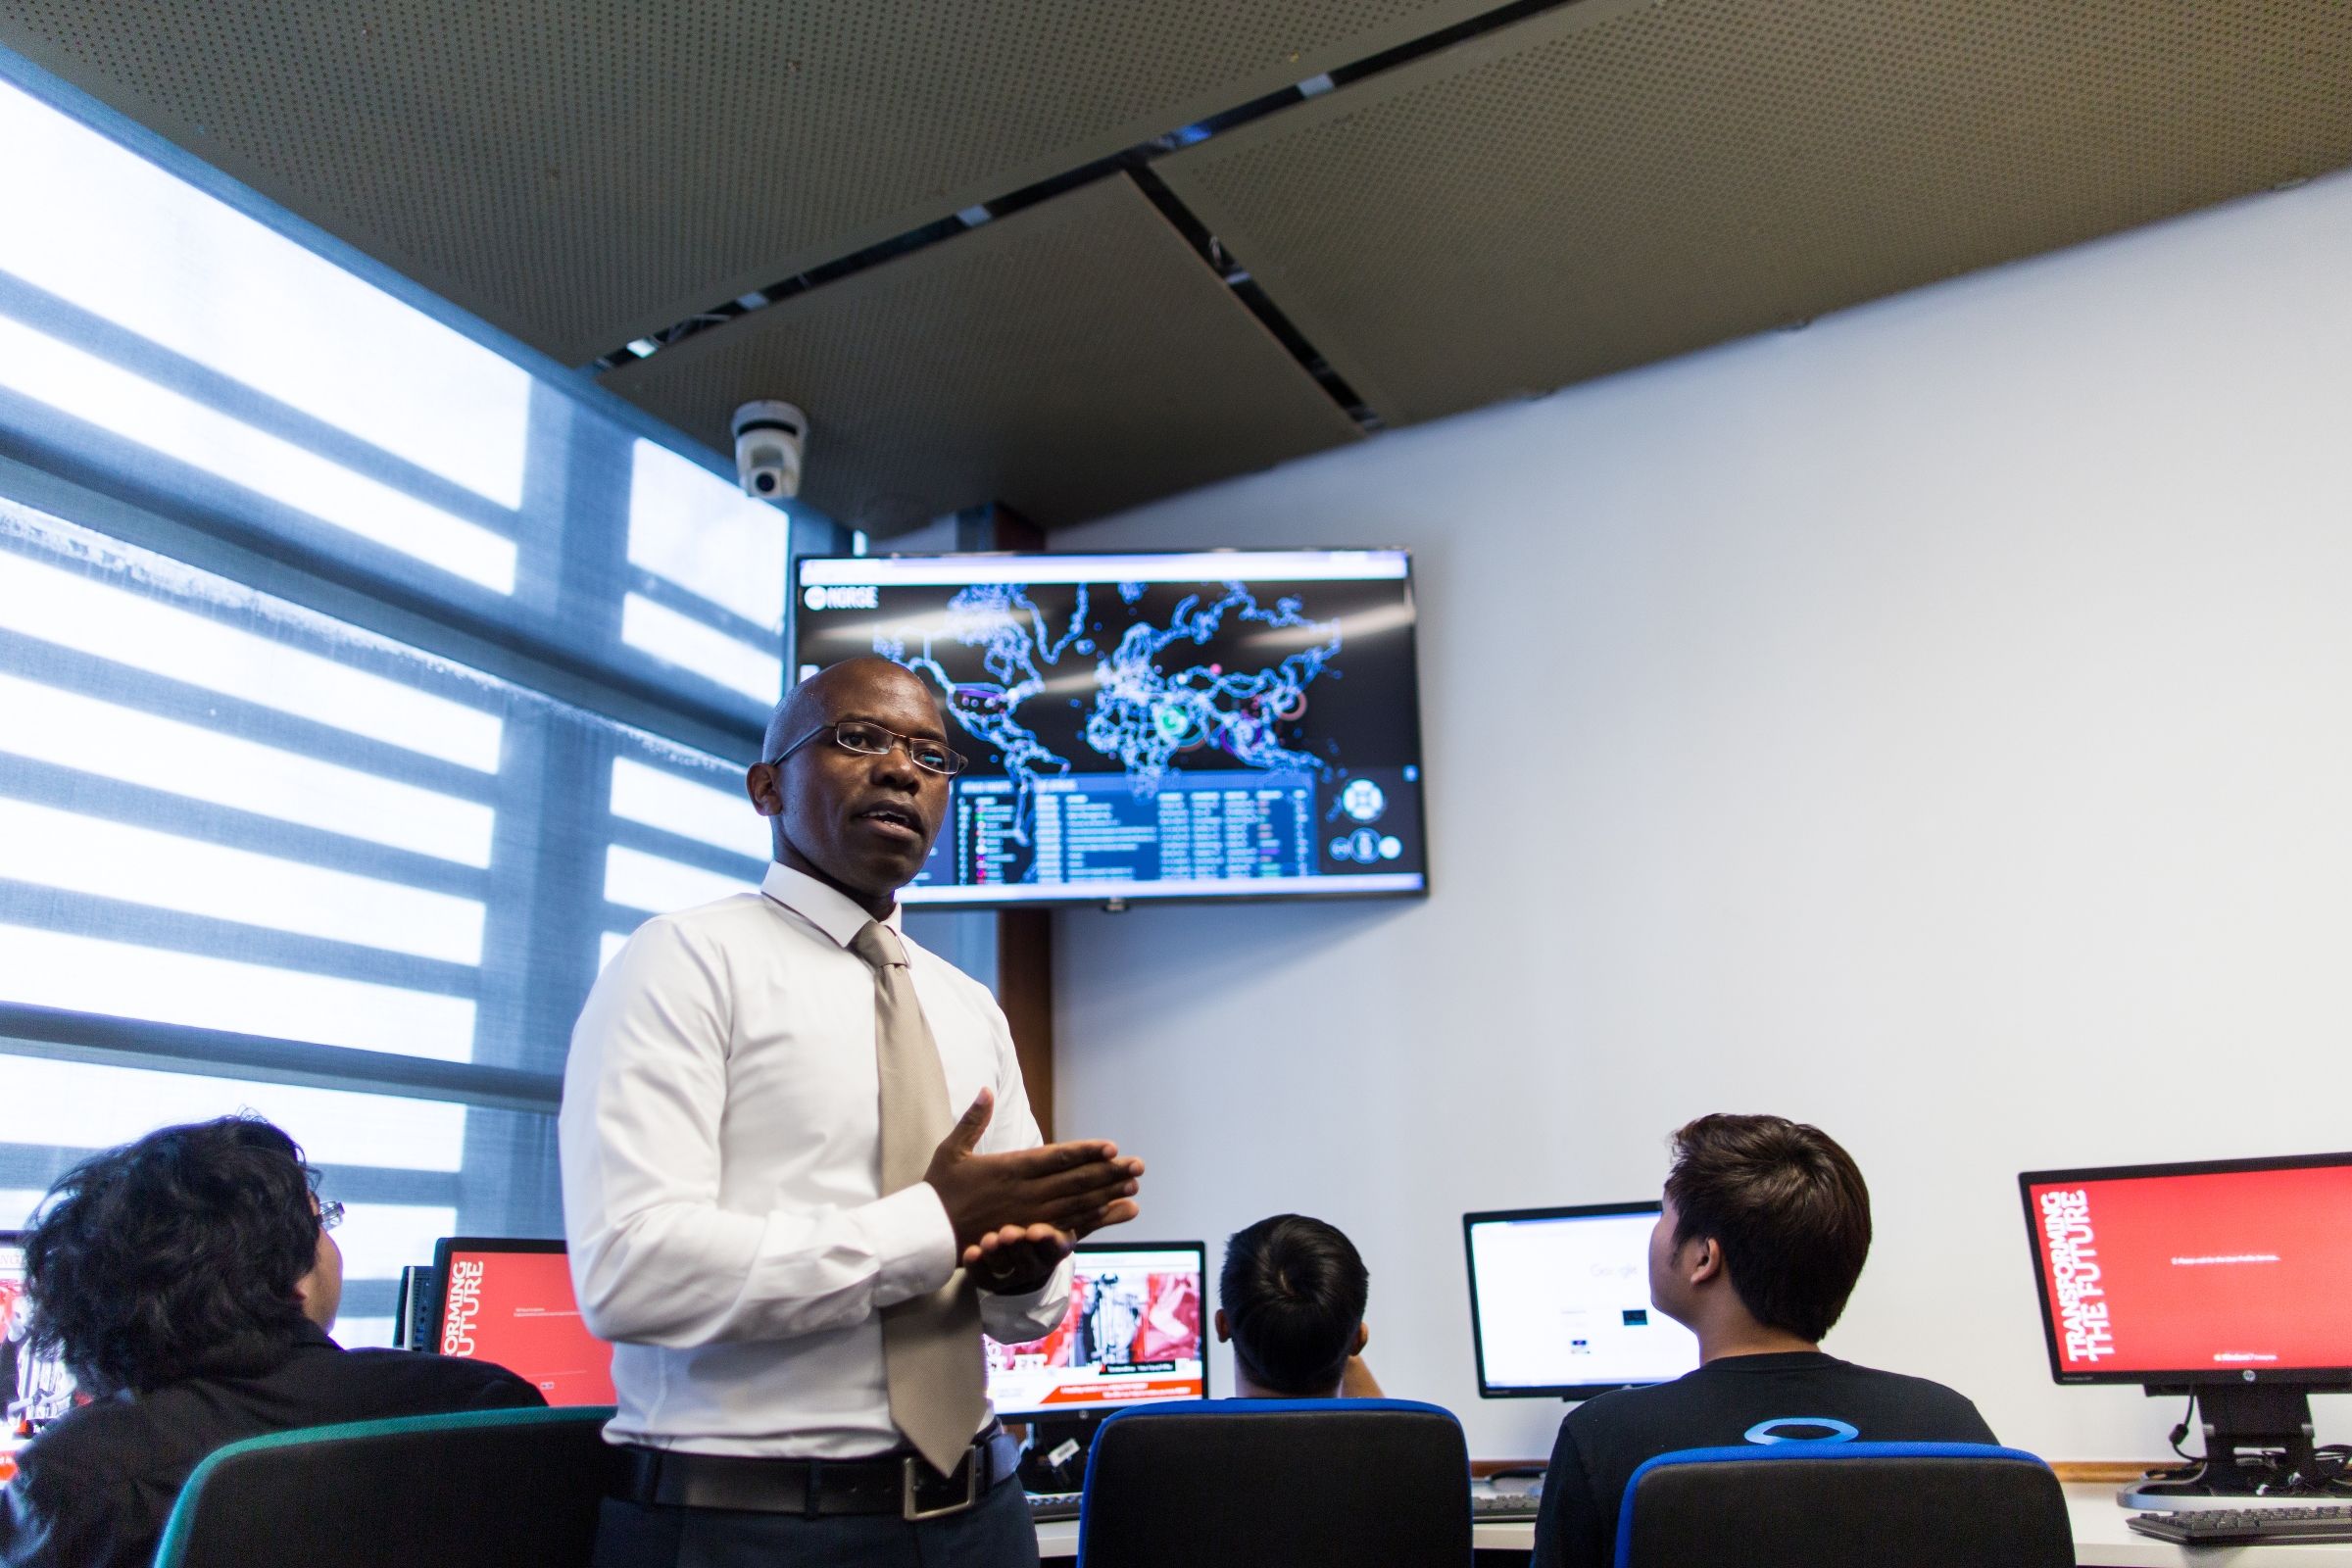 Associate Professor Mathews Nkhoma, Head of RMIT Vietnam’s School of Business and Management and co-organiser of the event at the University’s advanced cyber lab.